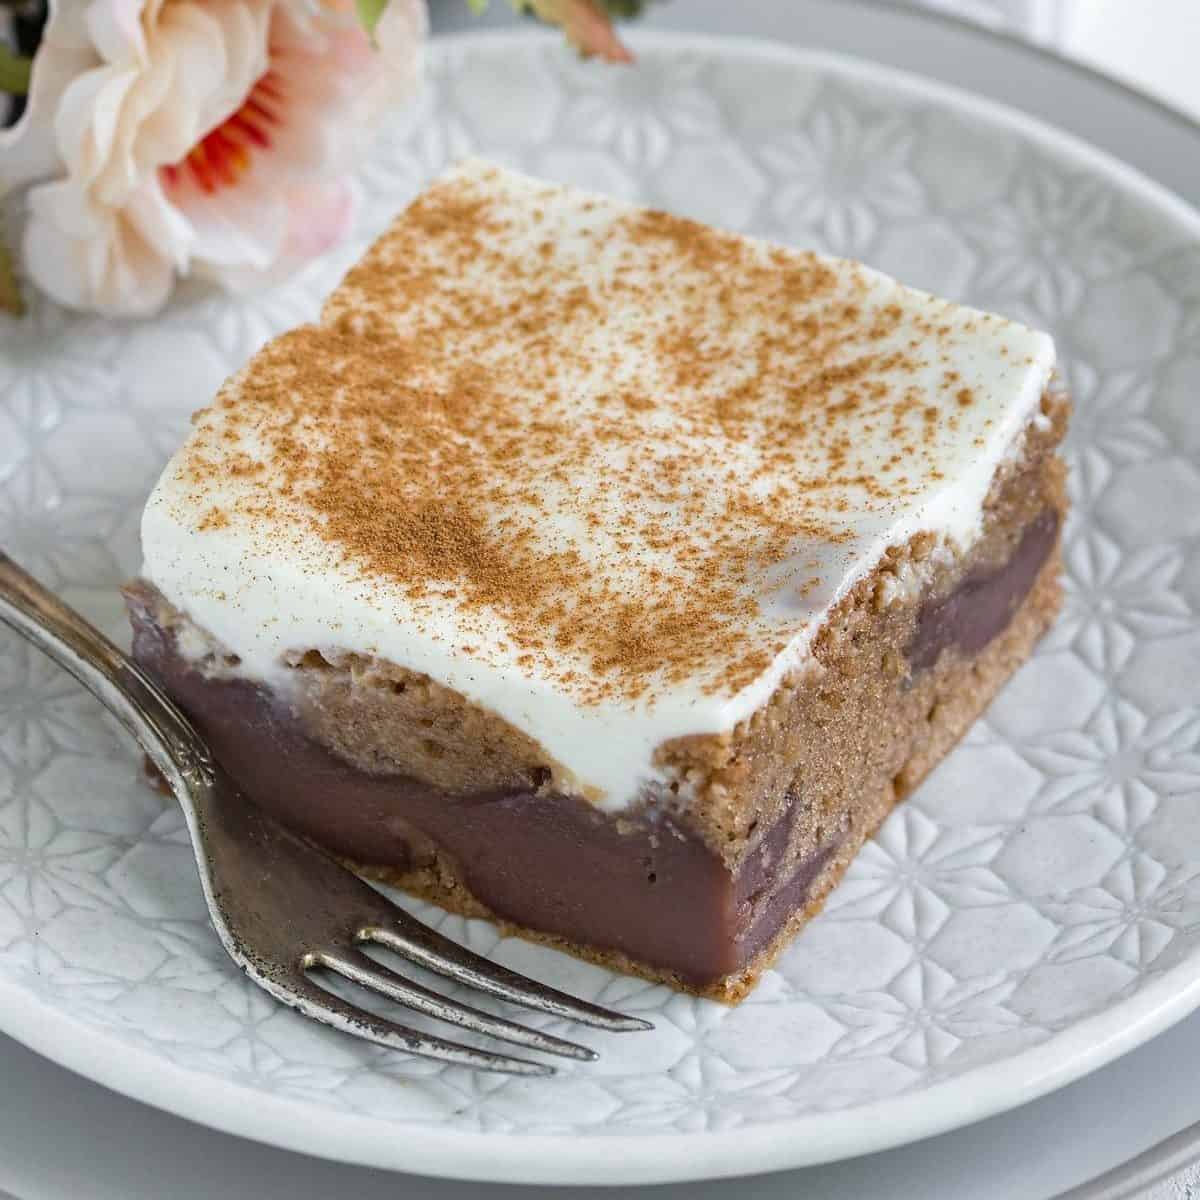 Sliced chocolate coffee cake with sour cream topping, served on a white plate.